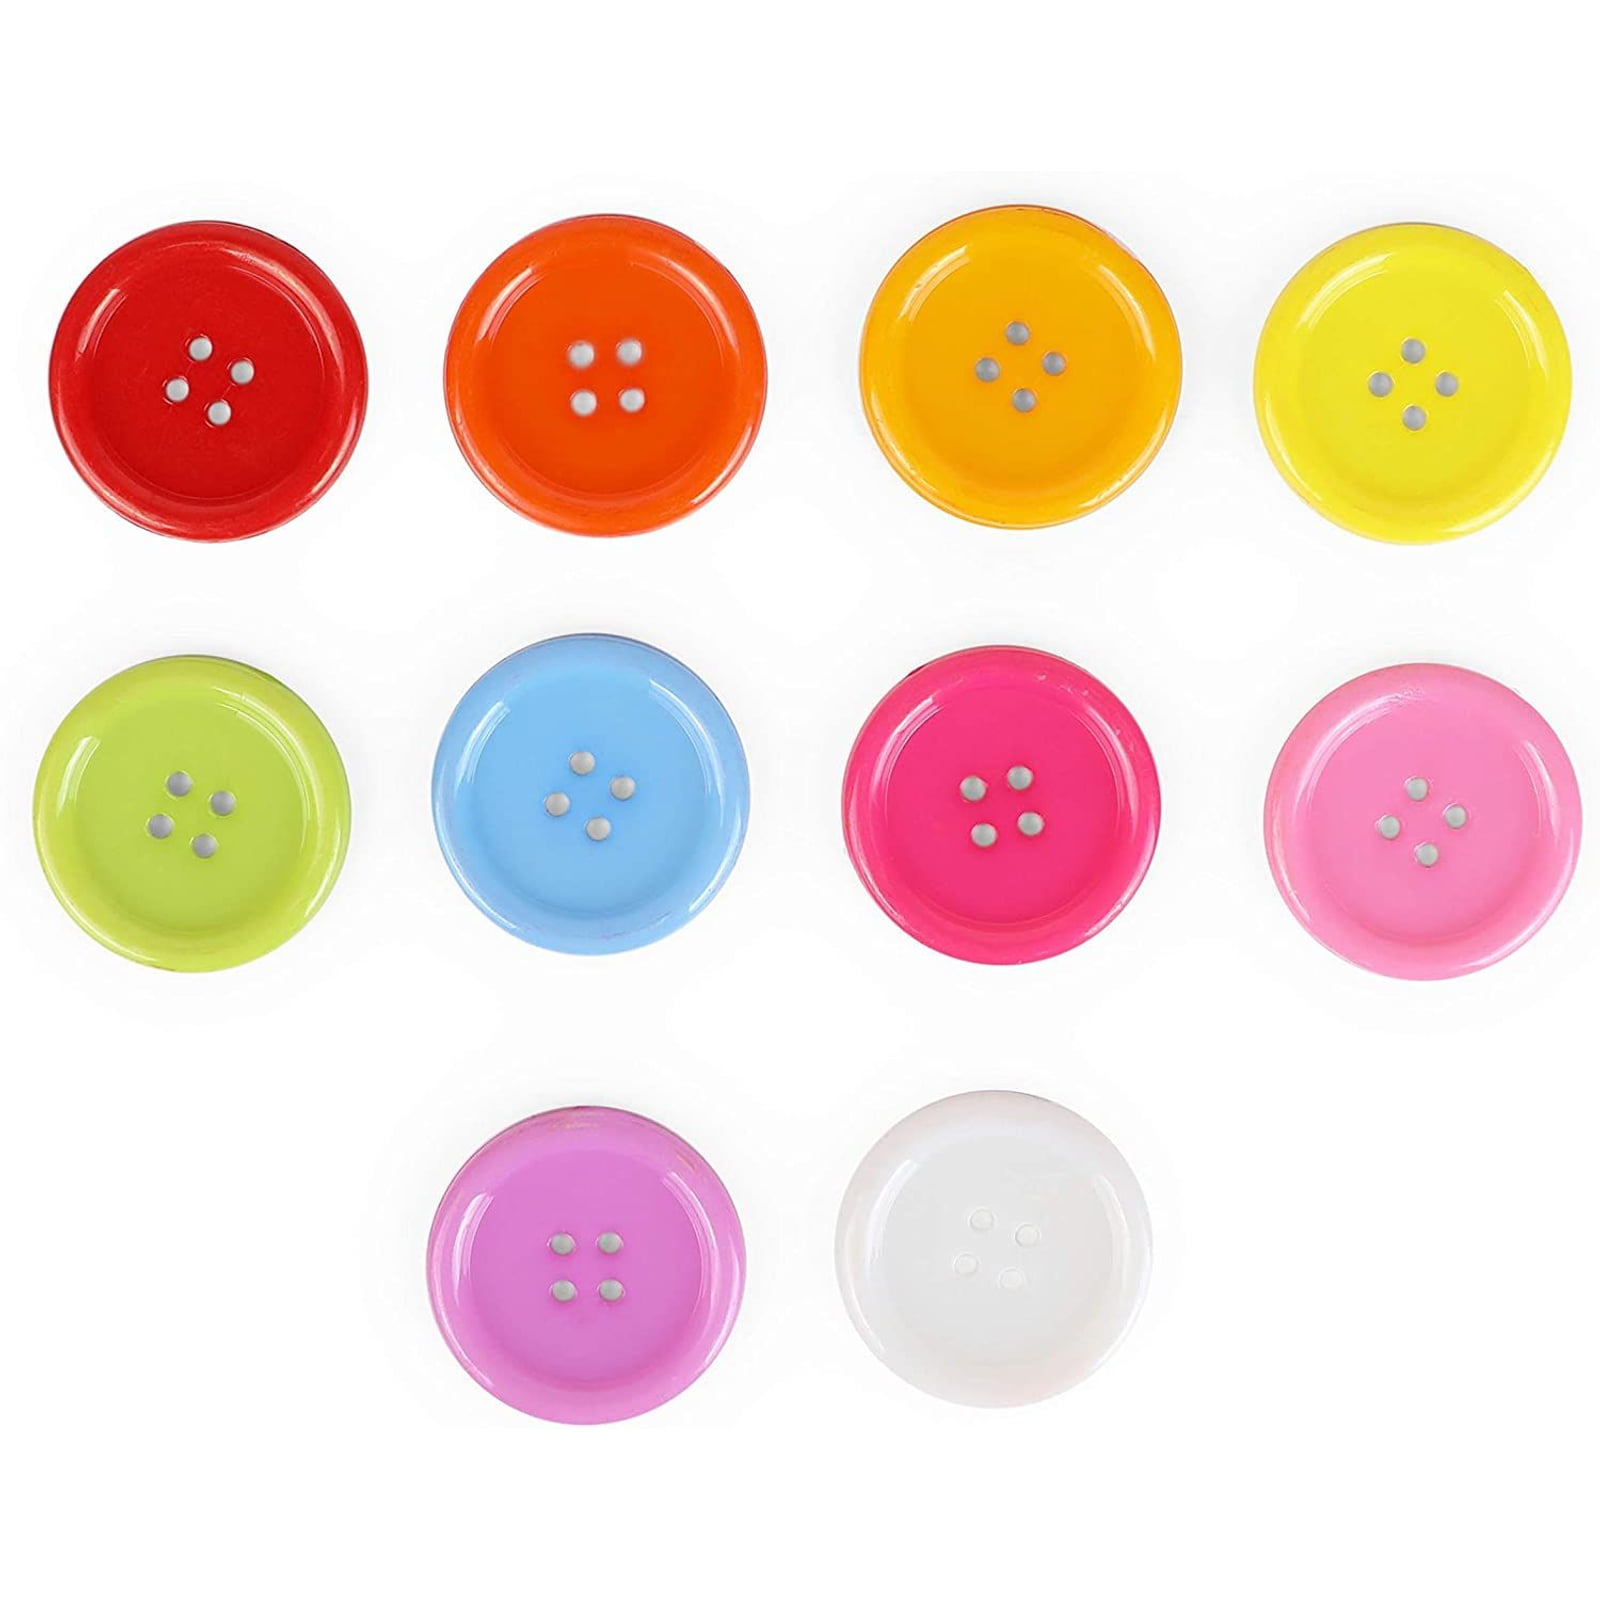 SMILEY FACE 13mm Plastic Shank Buttons Art Craft Kids Clothes Making Sewing 100 